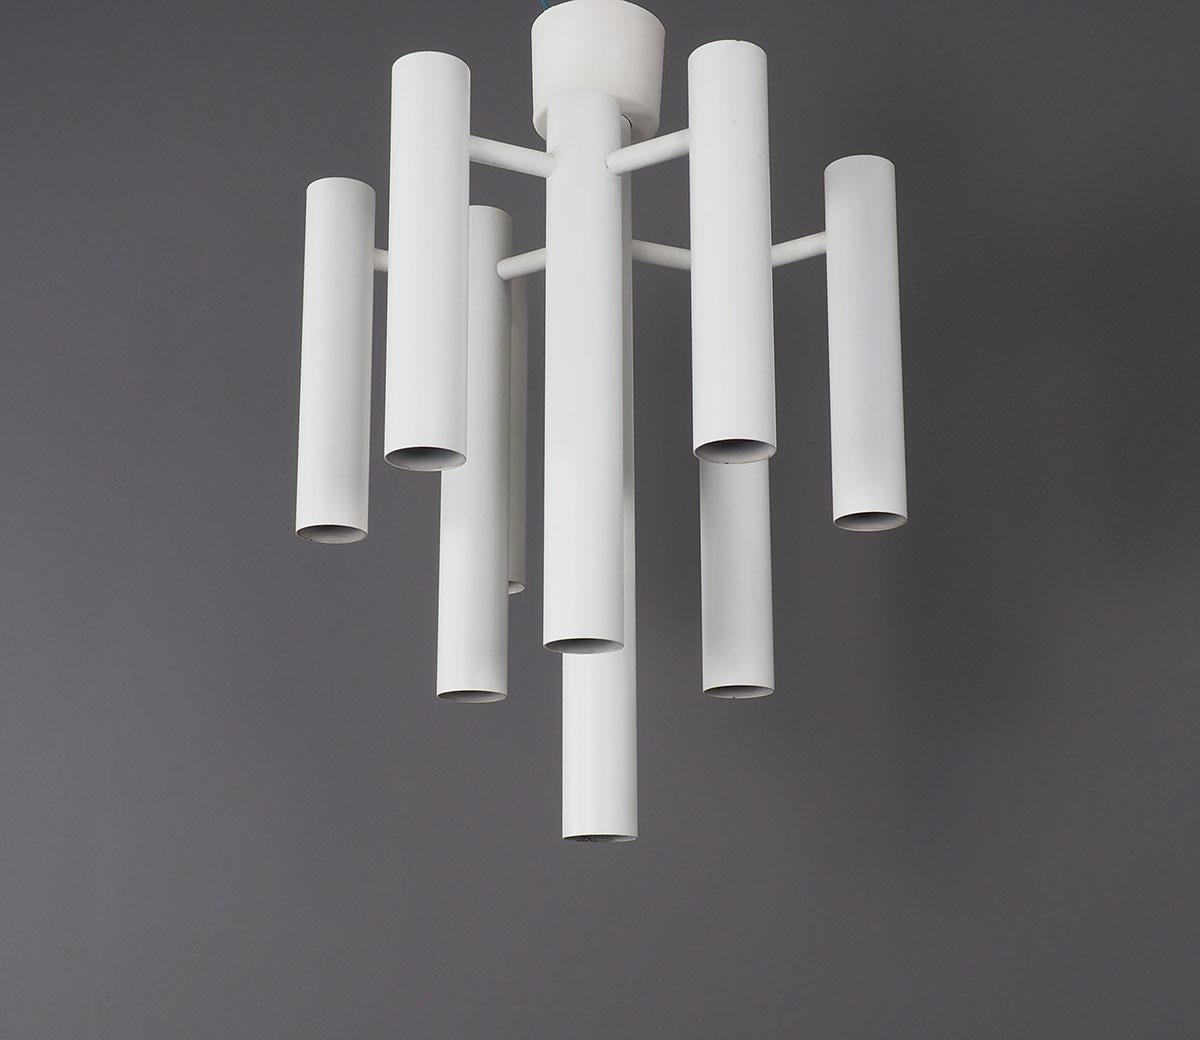 Space Age Ceiling Lamp in White Metal by Temde, 1970s For Sale 2